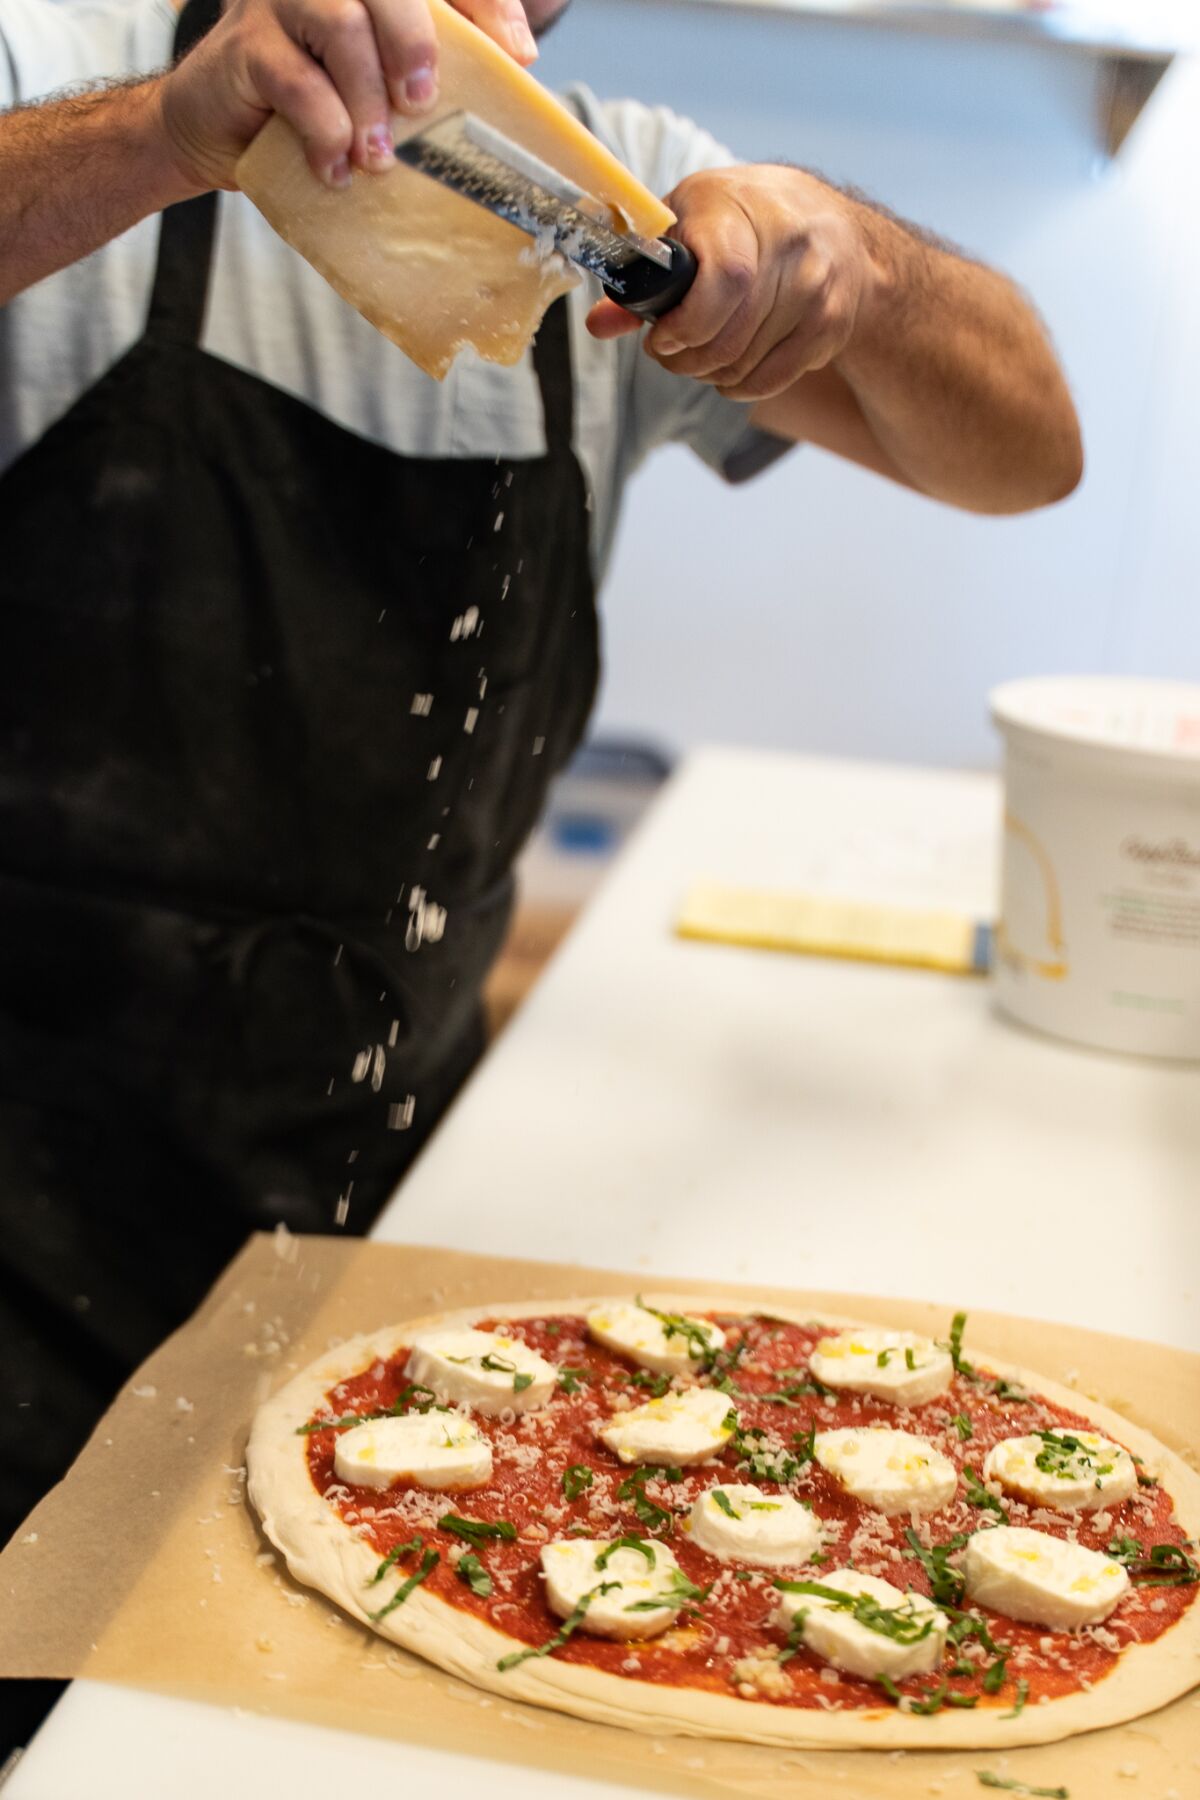 Each American Pizza Mfg. meal is assembled in the shop, then wrapped for customers to cook at home.